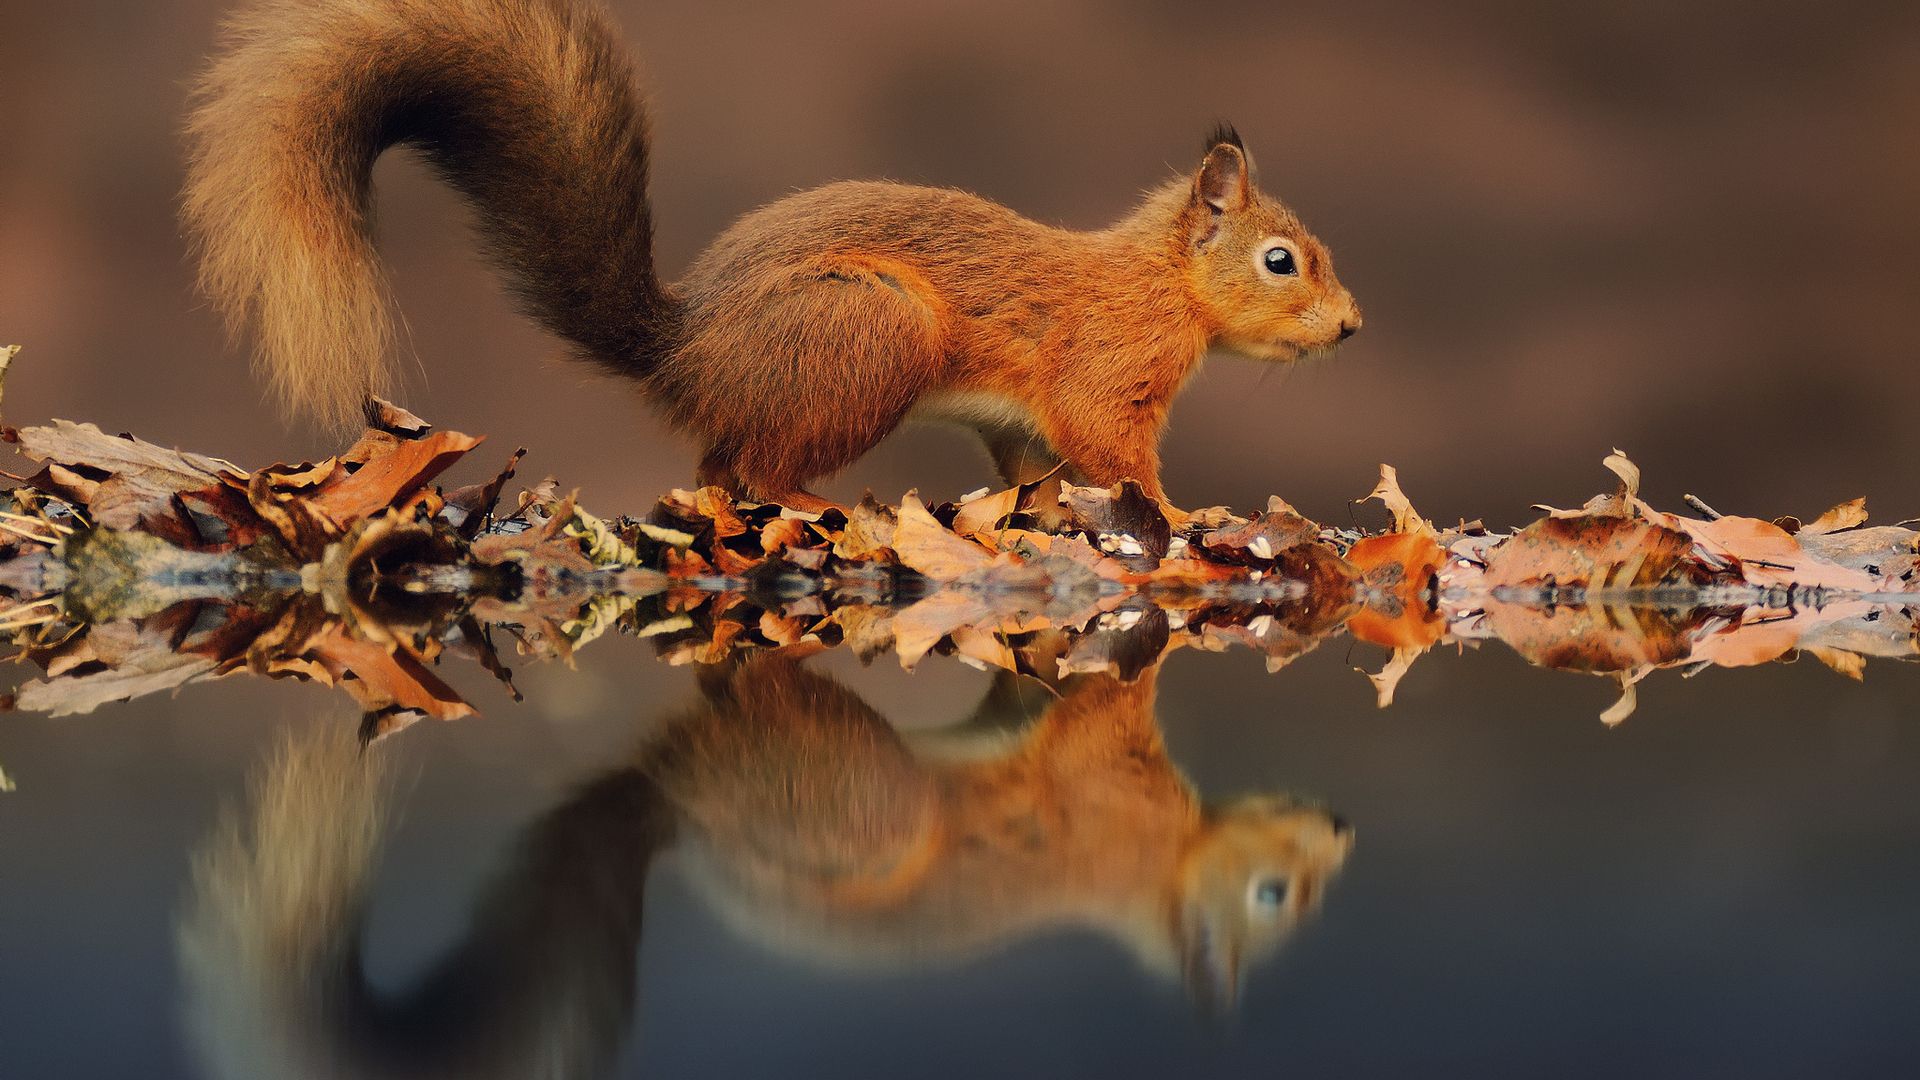 HD Squirrel Wallpaper and Photo. View Full HD Wallpaper